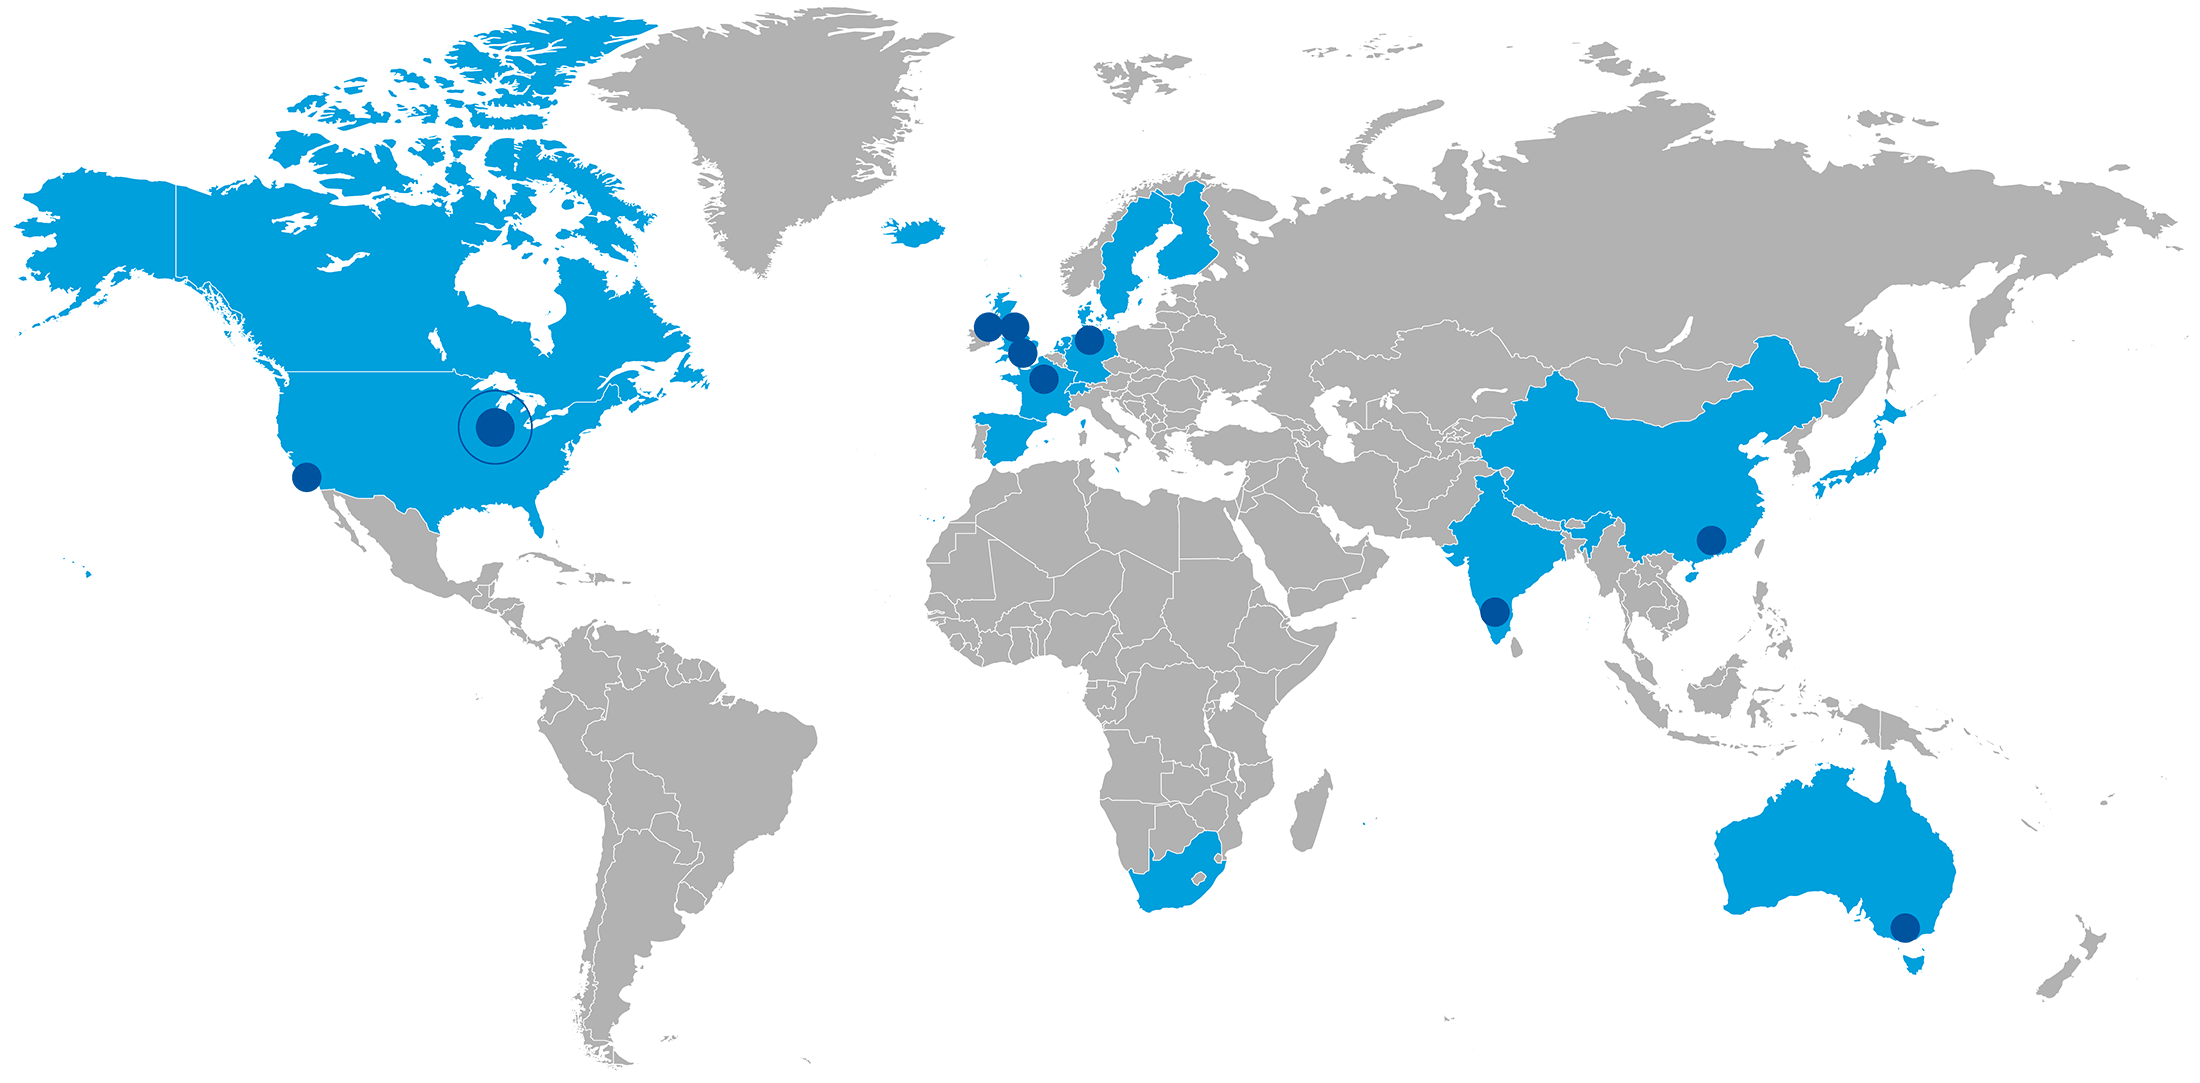 careers-locations-map-static-b